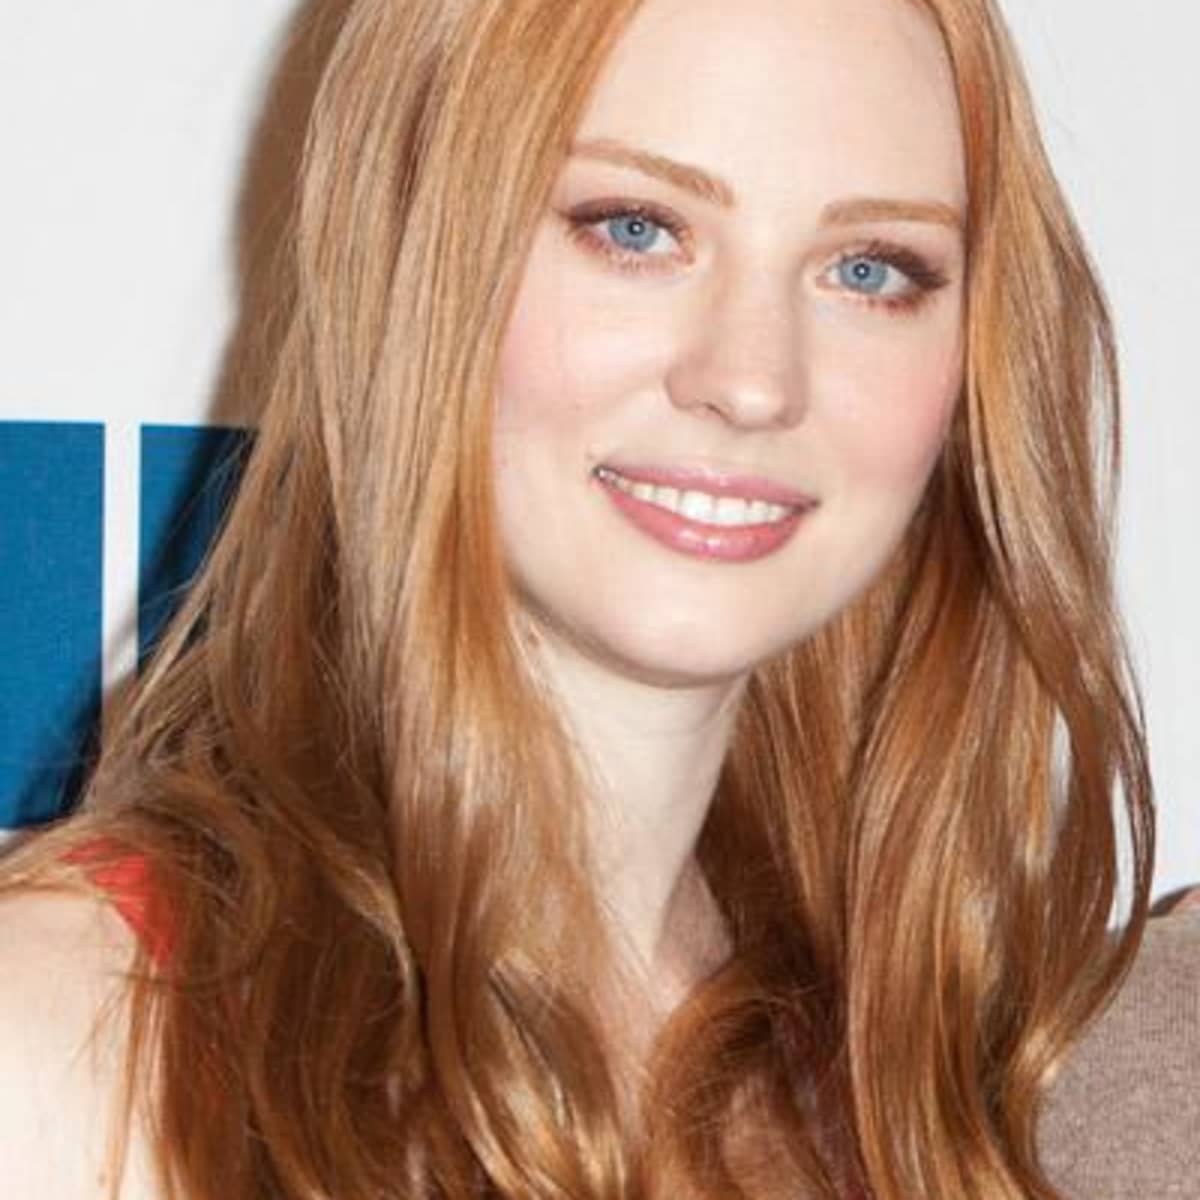 Strawberry Blonde Hair Color Pictures and How to Get the Look - HubPages